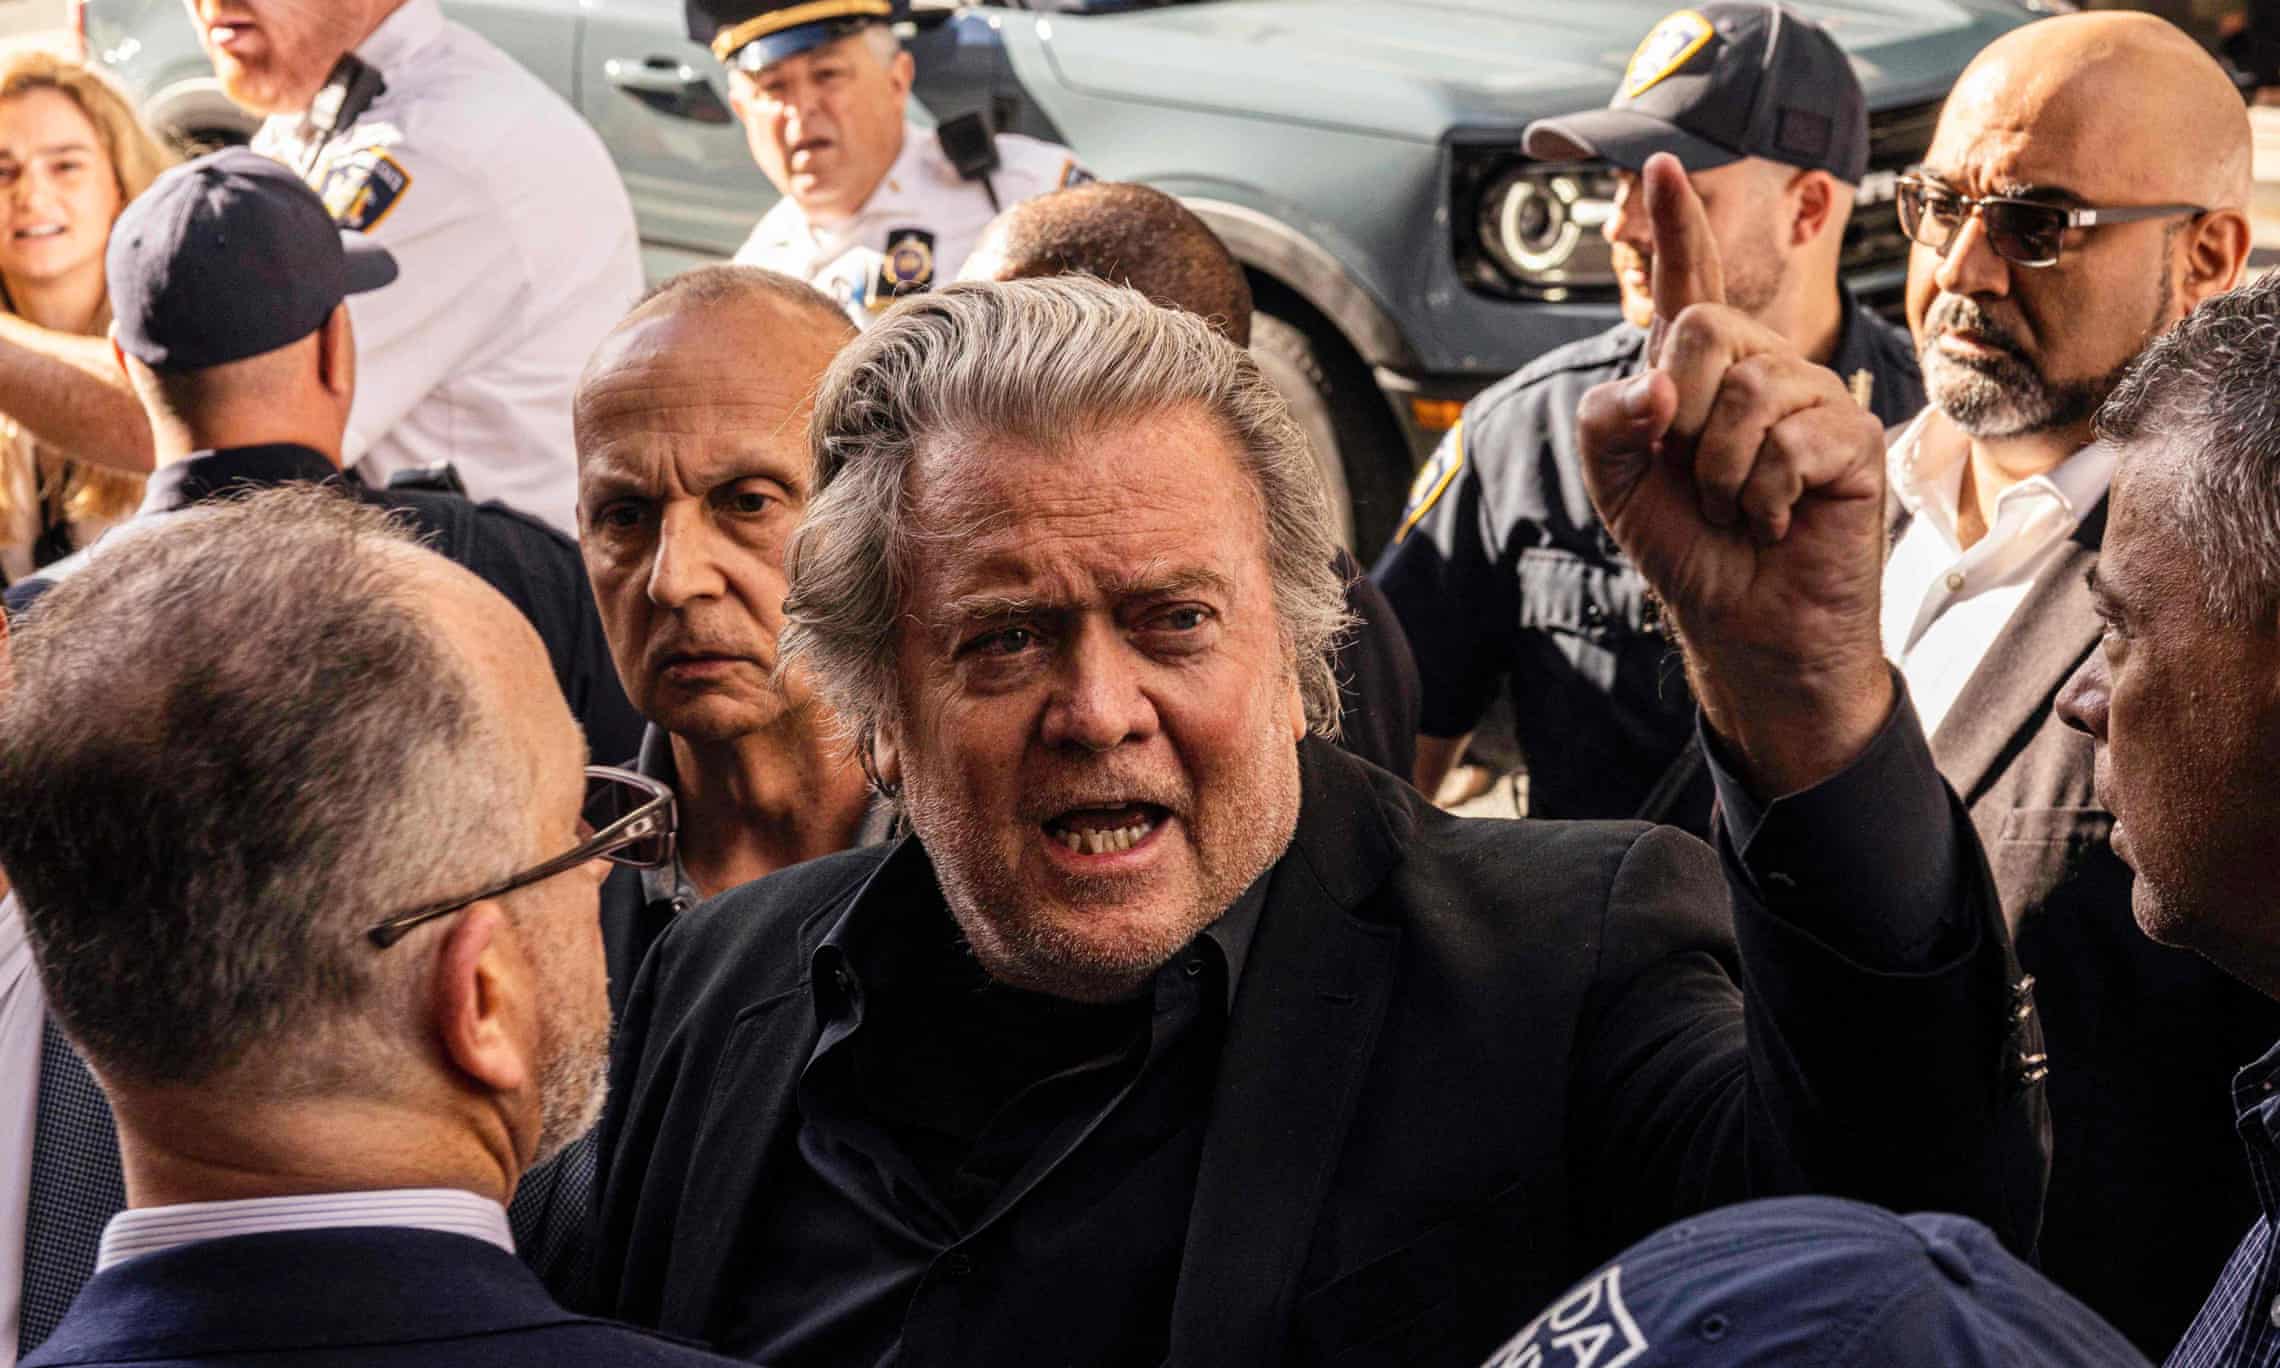 Inside Steve Bannon’s ‘disturbing’ quest to radically rewrite the US constitution (theguardian.com)